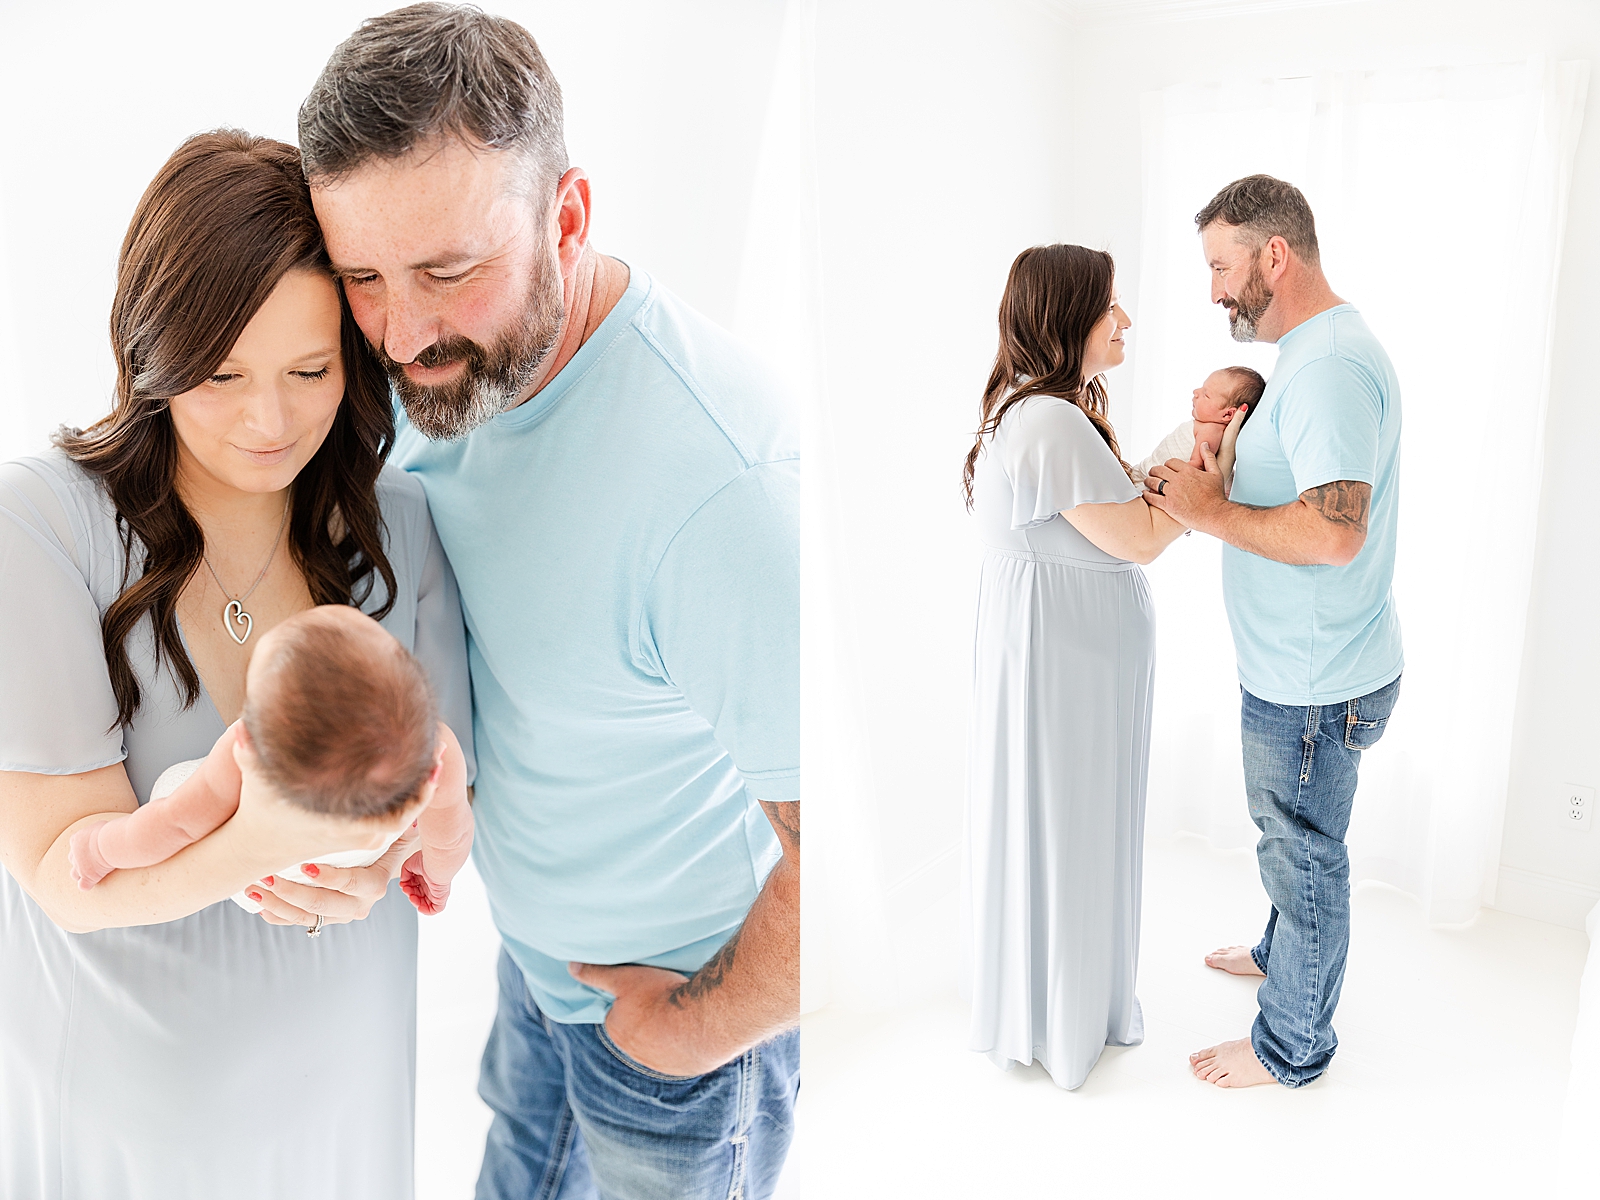 Newborn photos with mom and dad mom wearing light blue gown and dad wearing blur pans and a light blue shirt holding baby and smiling at each other and at baby